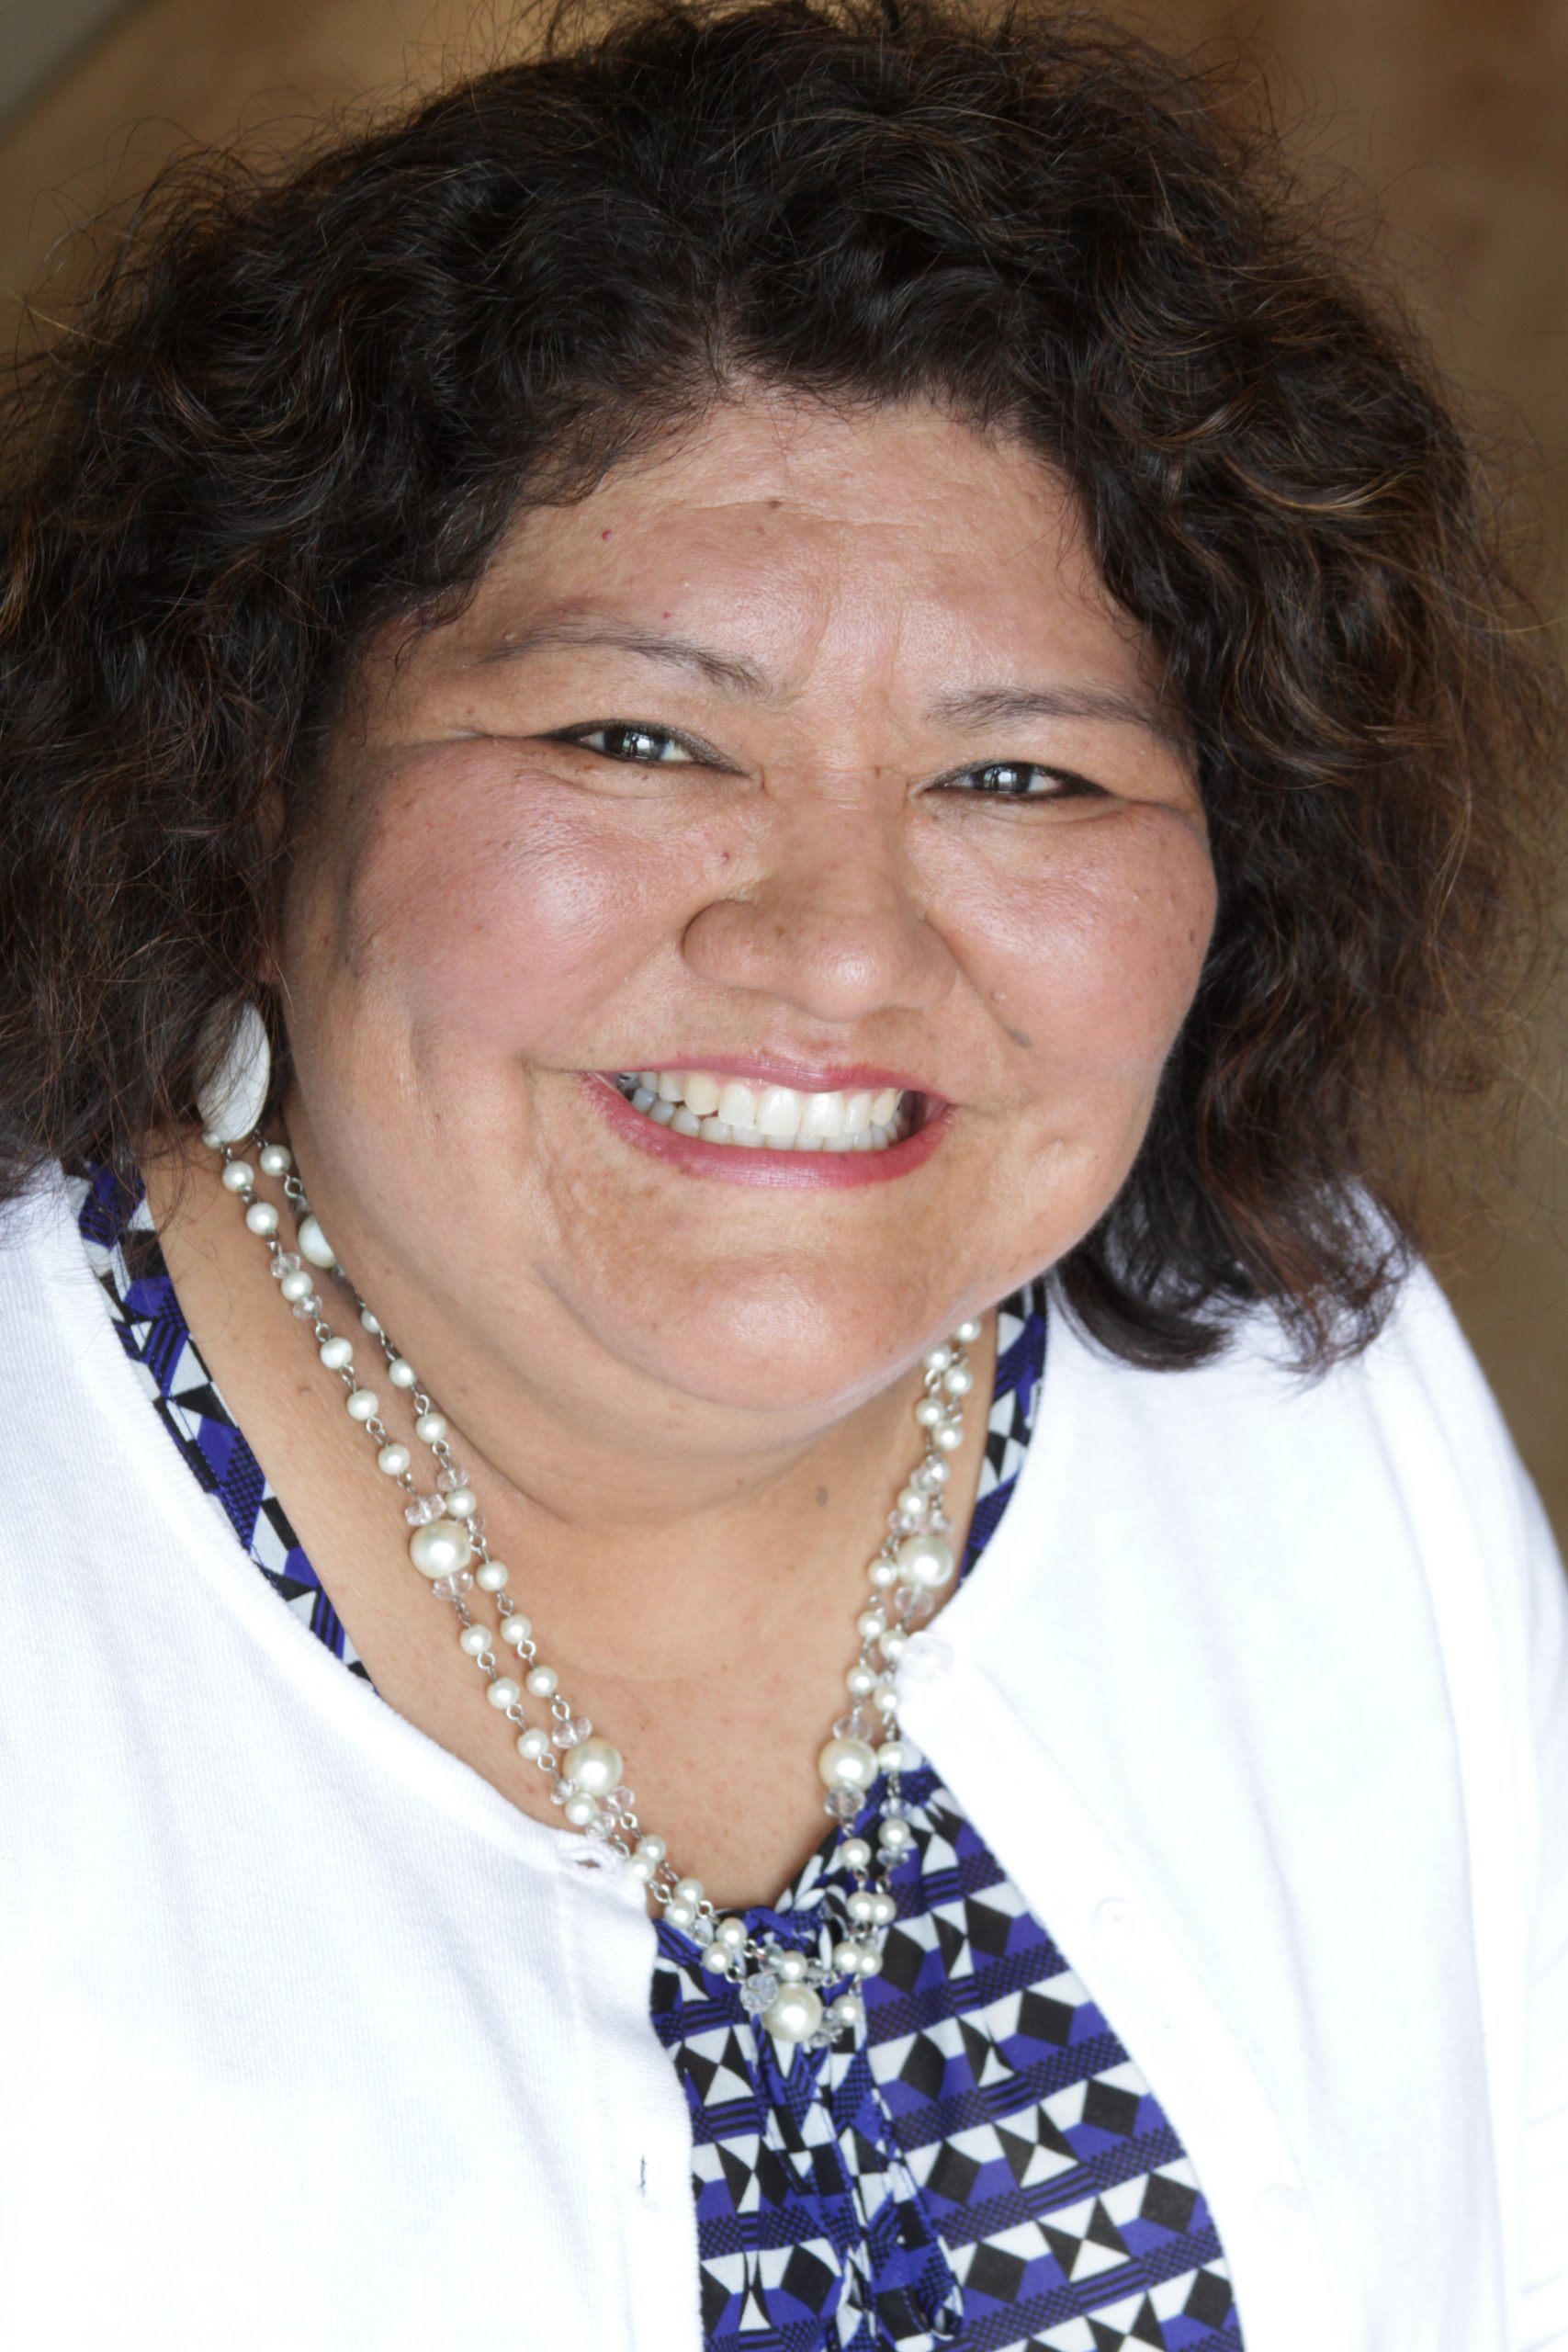 Yazzie-Mintz is Co-Director of the Office of Research and Sponsored Programs and Senior Program Officer of Tribal College and Universities (TCUs) Early Childhood Education Initiatives at the American Indian College Fund.